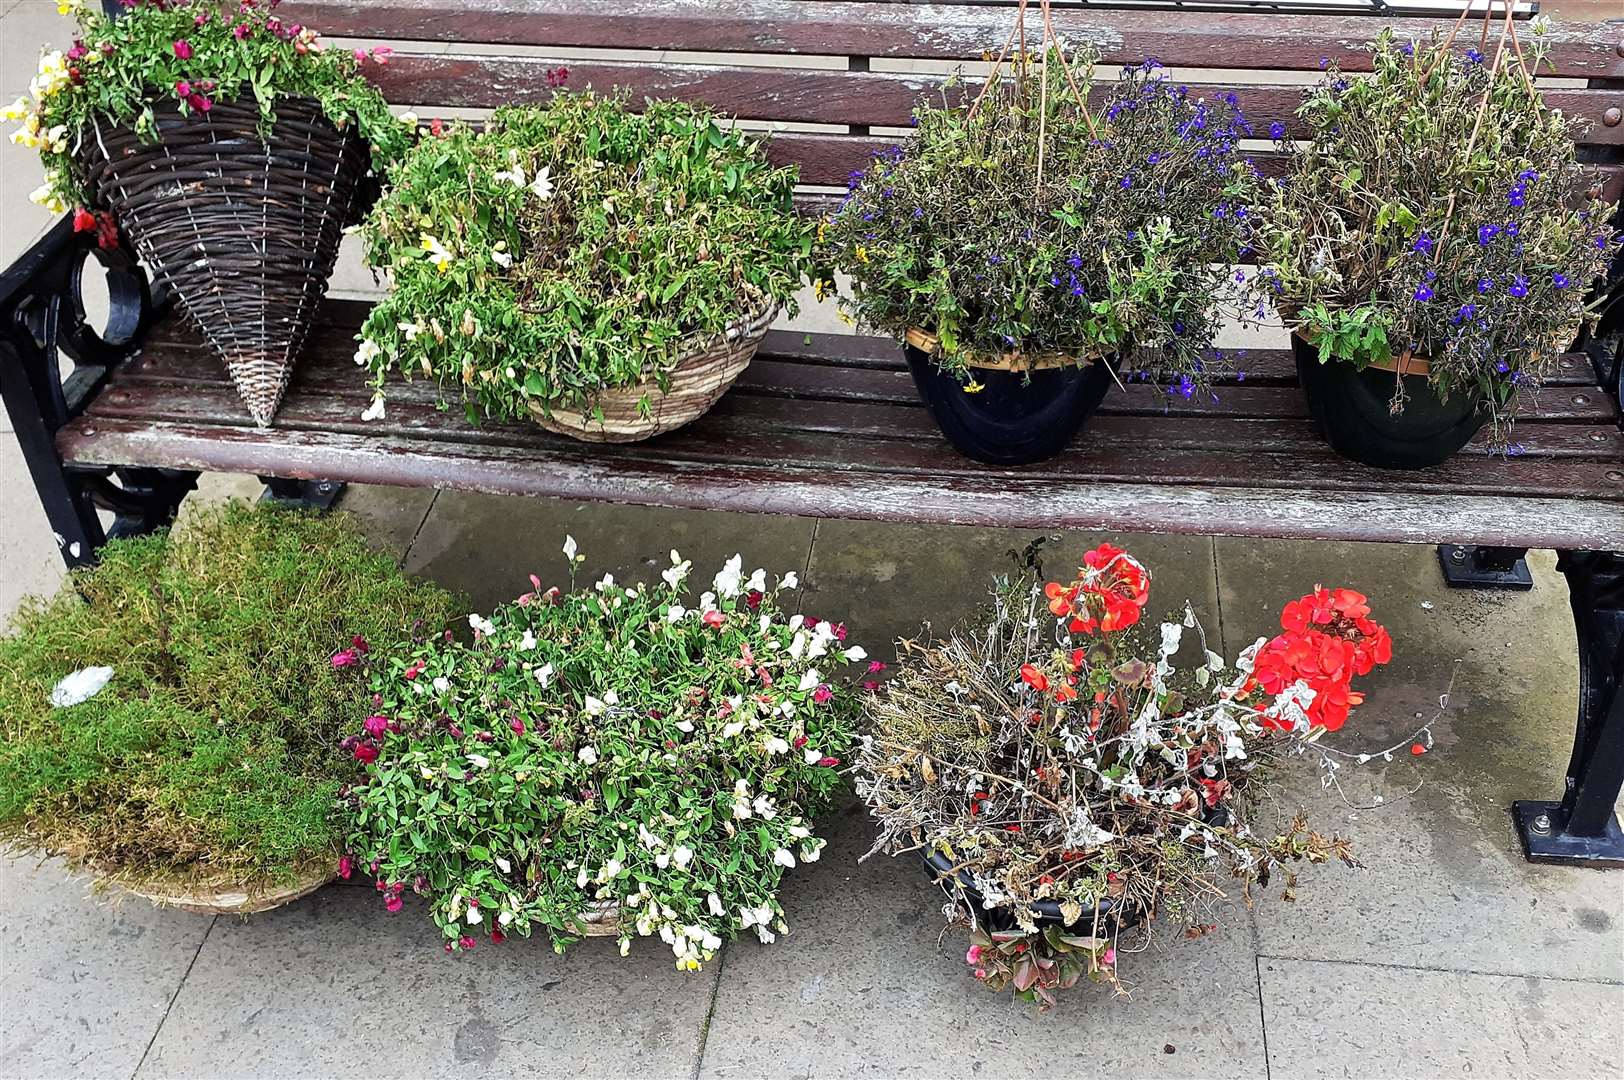 Flower baskets that Alexander Glasgow has located in Thurso town centre.